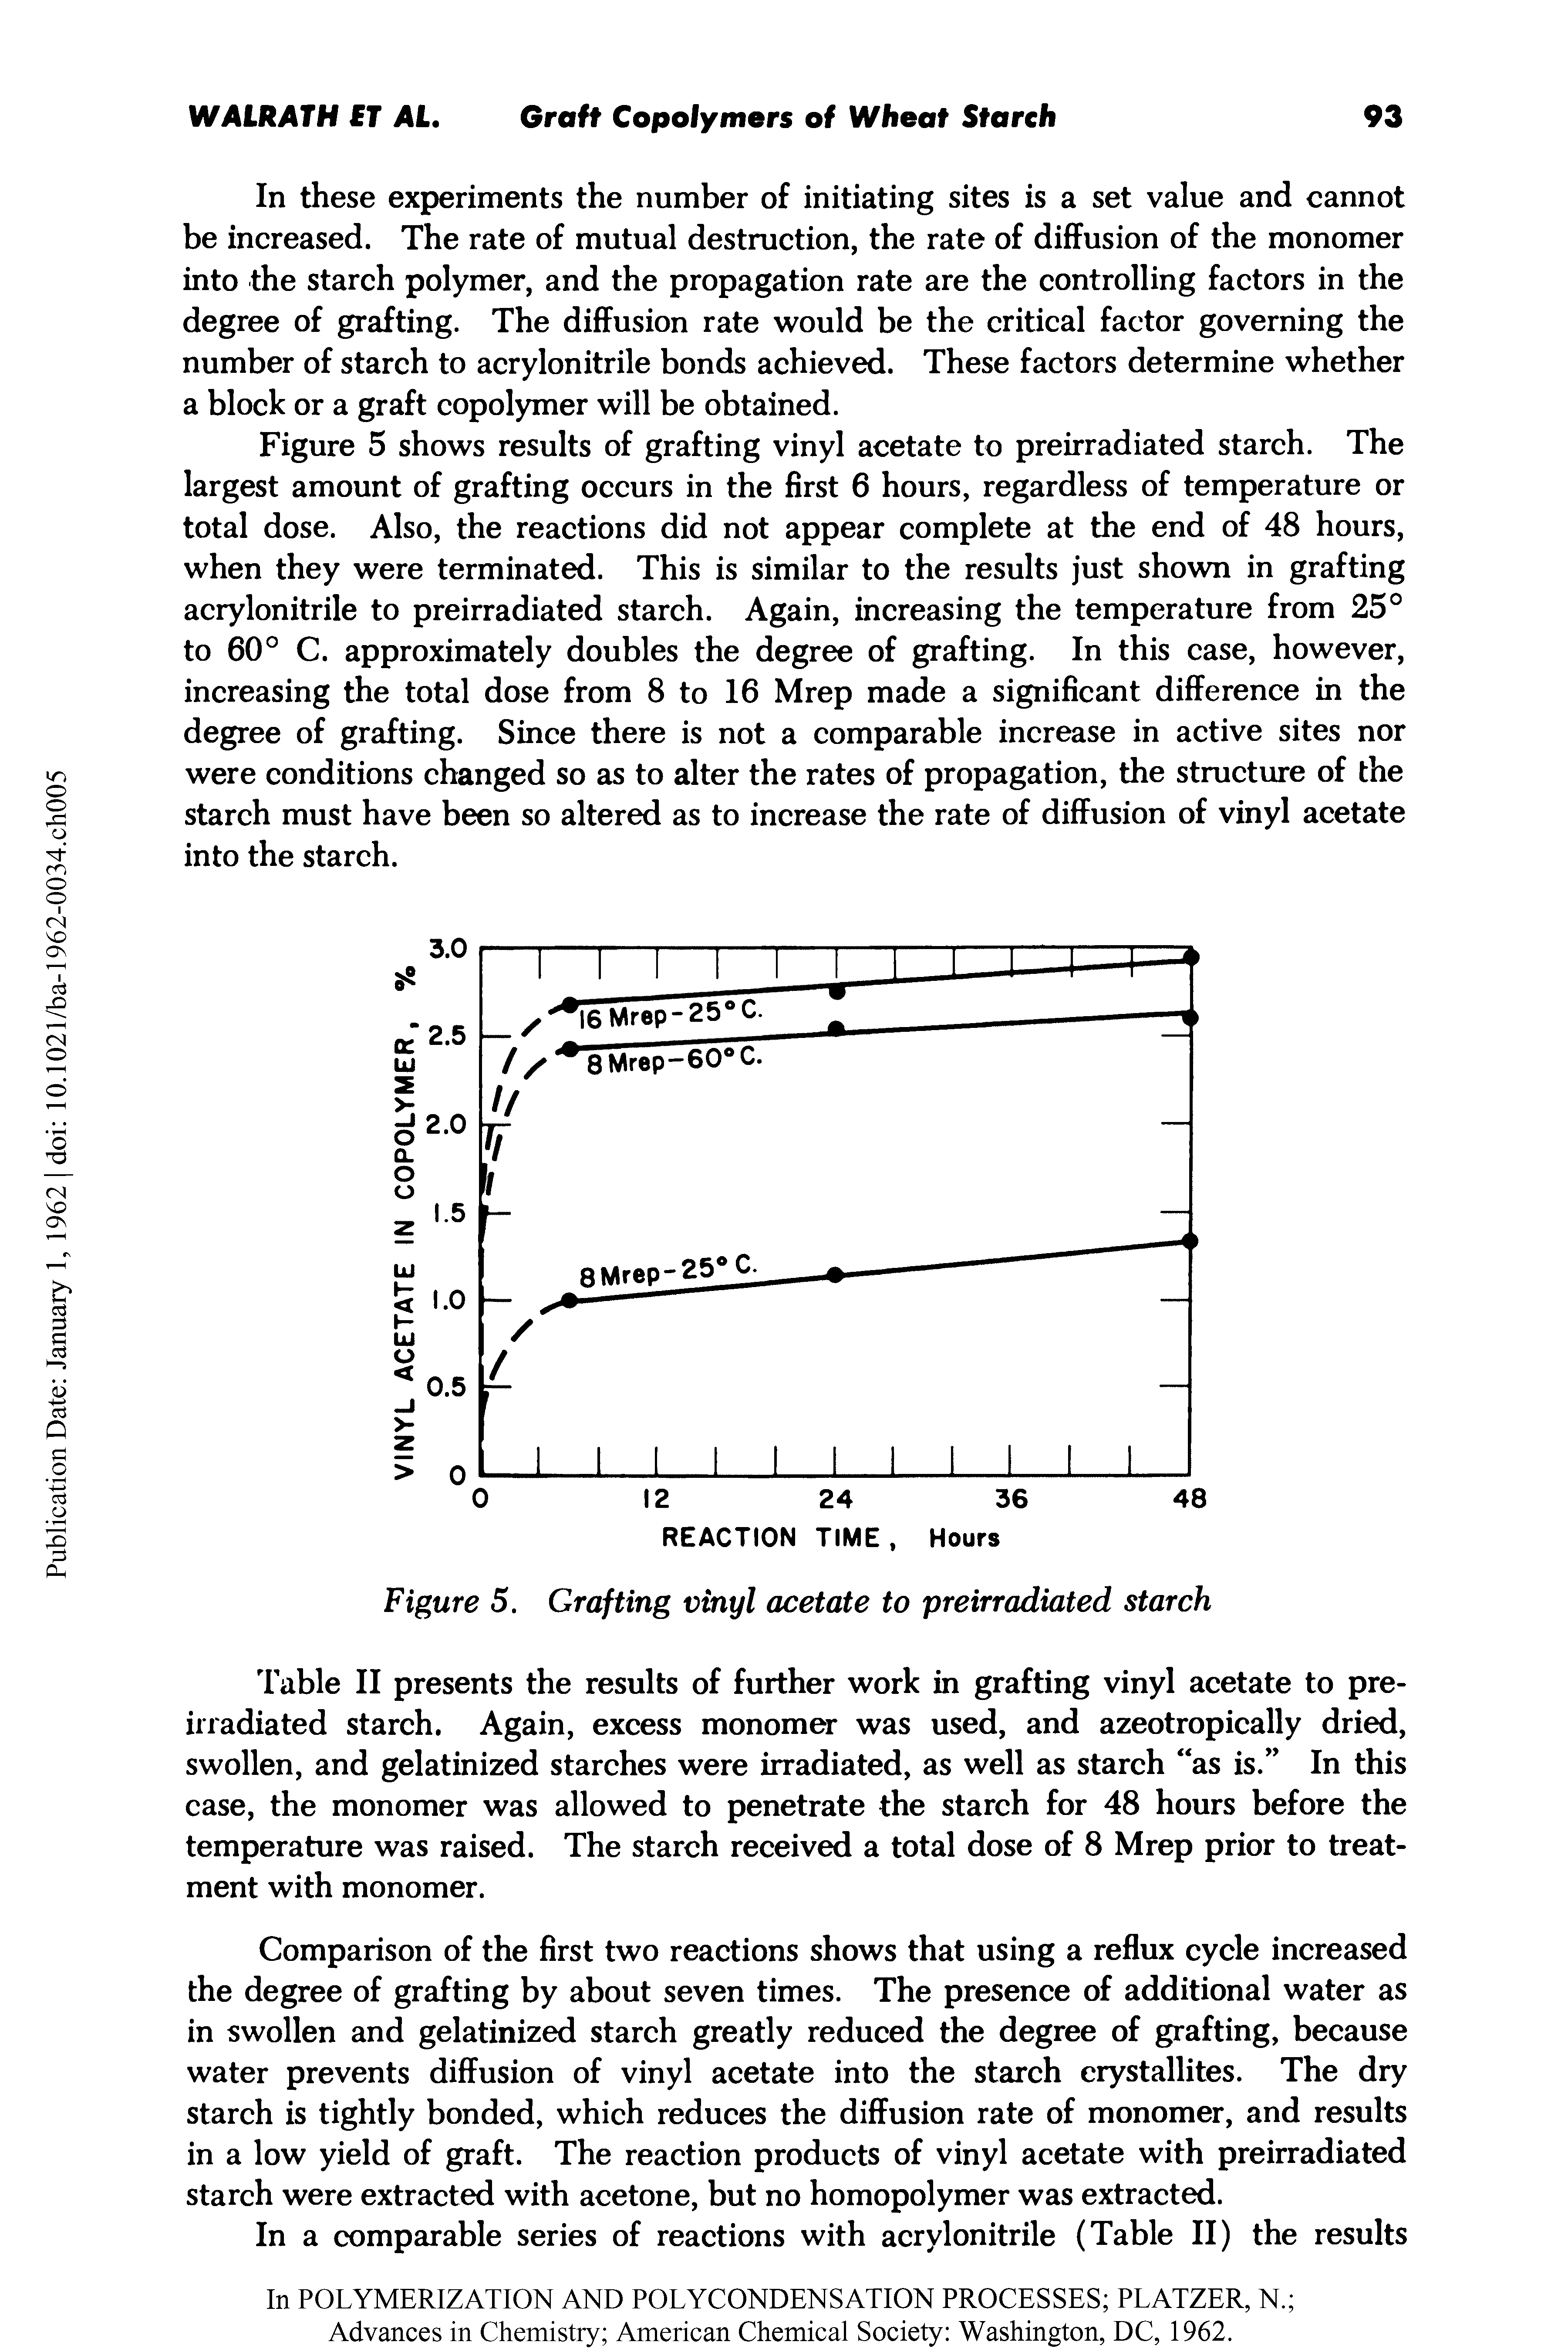 Table II presents the results of further work in grafting vinyl acetate to pre-iiradiated starch. Again, excess monomer was used, and azeotropically dried, swollen, and gelatinized starches were irradiated, as well as starch as is. In this case, the monomer was allowed to penetrate the starch for 48 hours before the temperature was raised. The starch received a total dose of 8 Mrep prior to treatment with monomer.